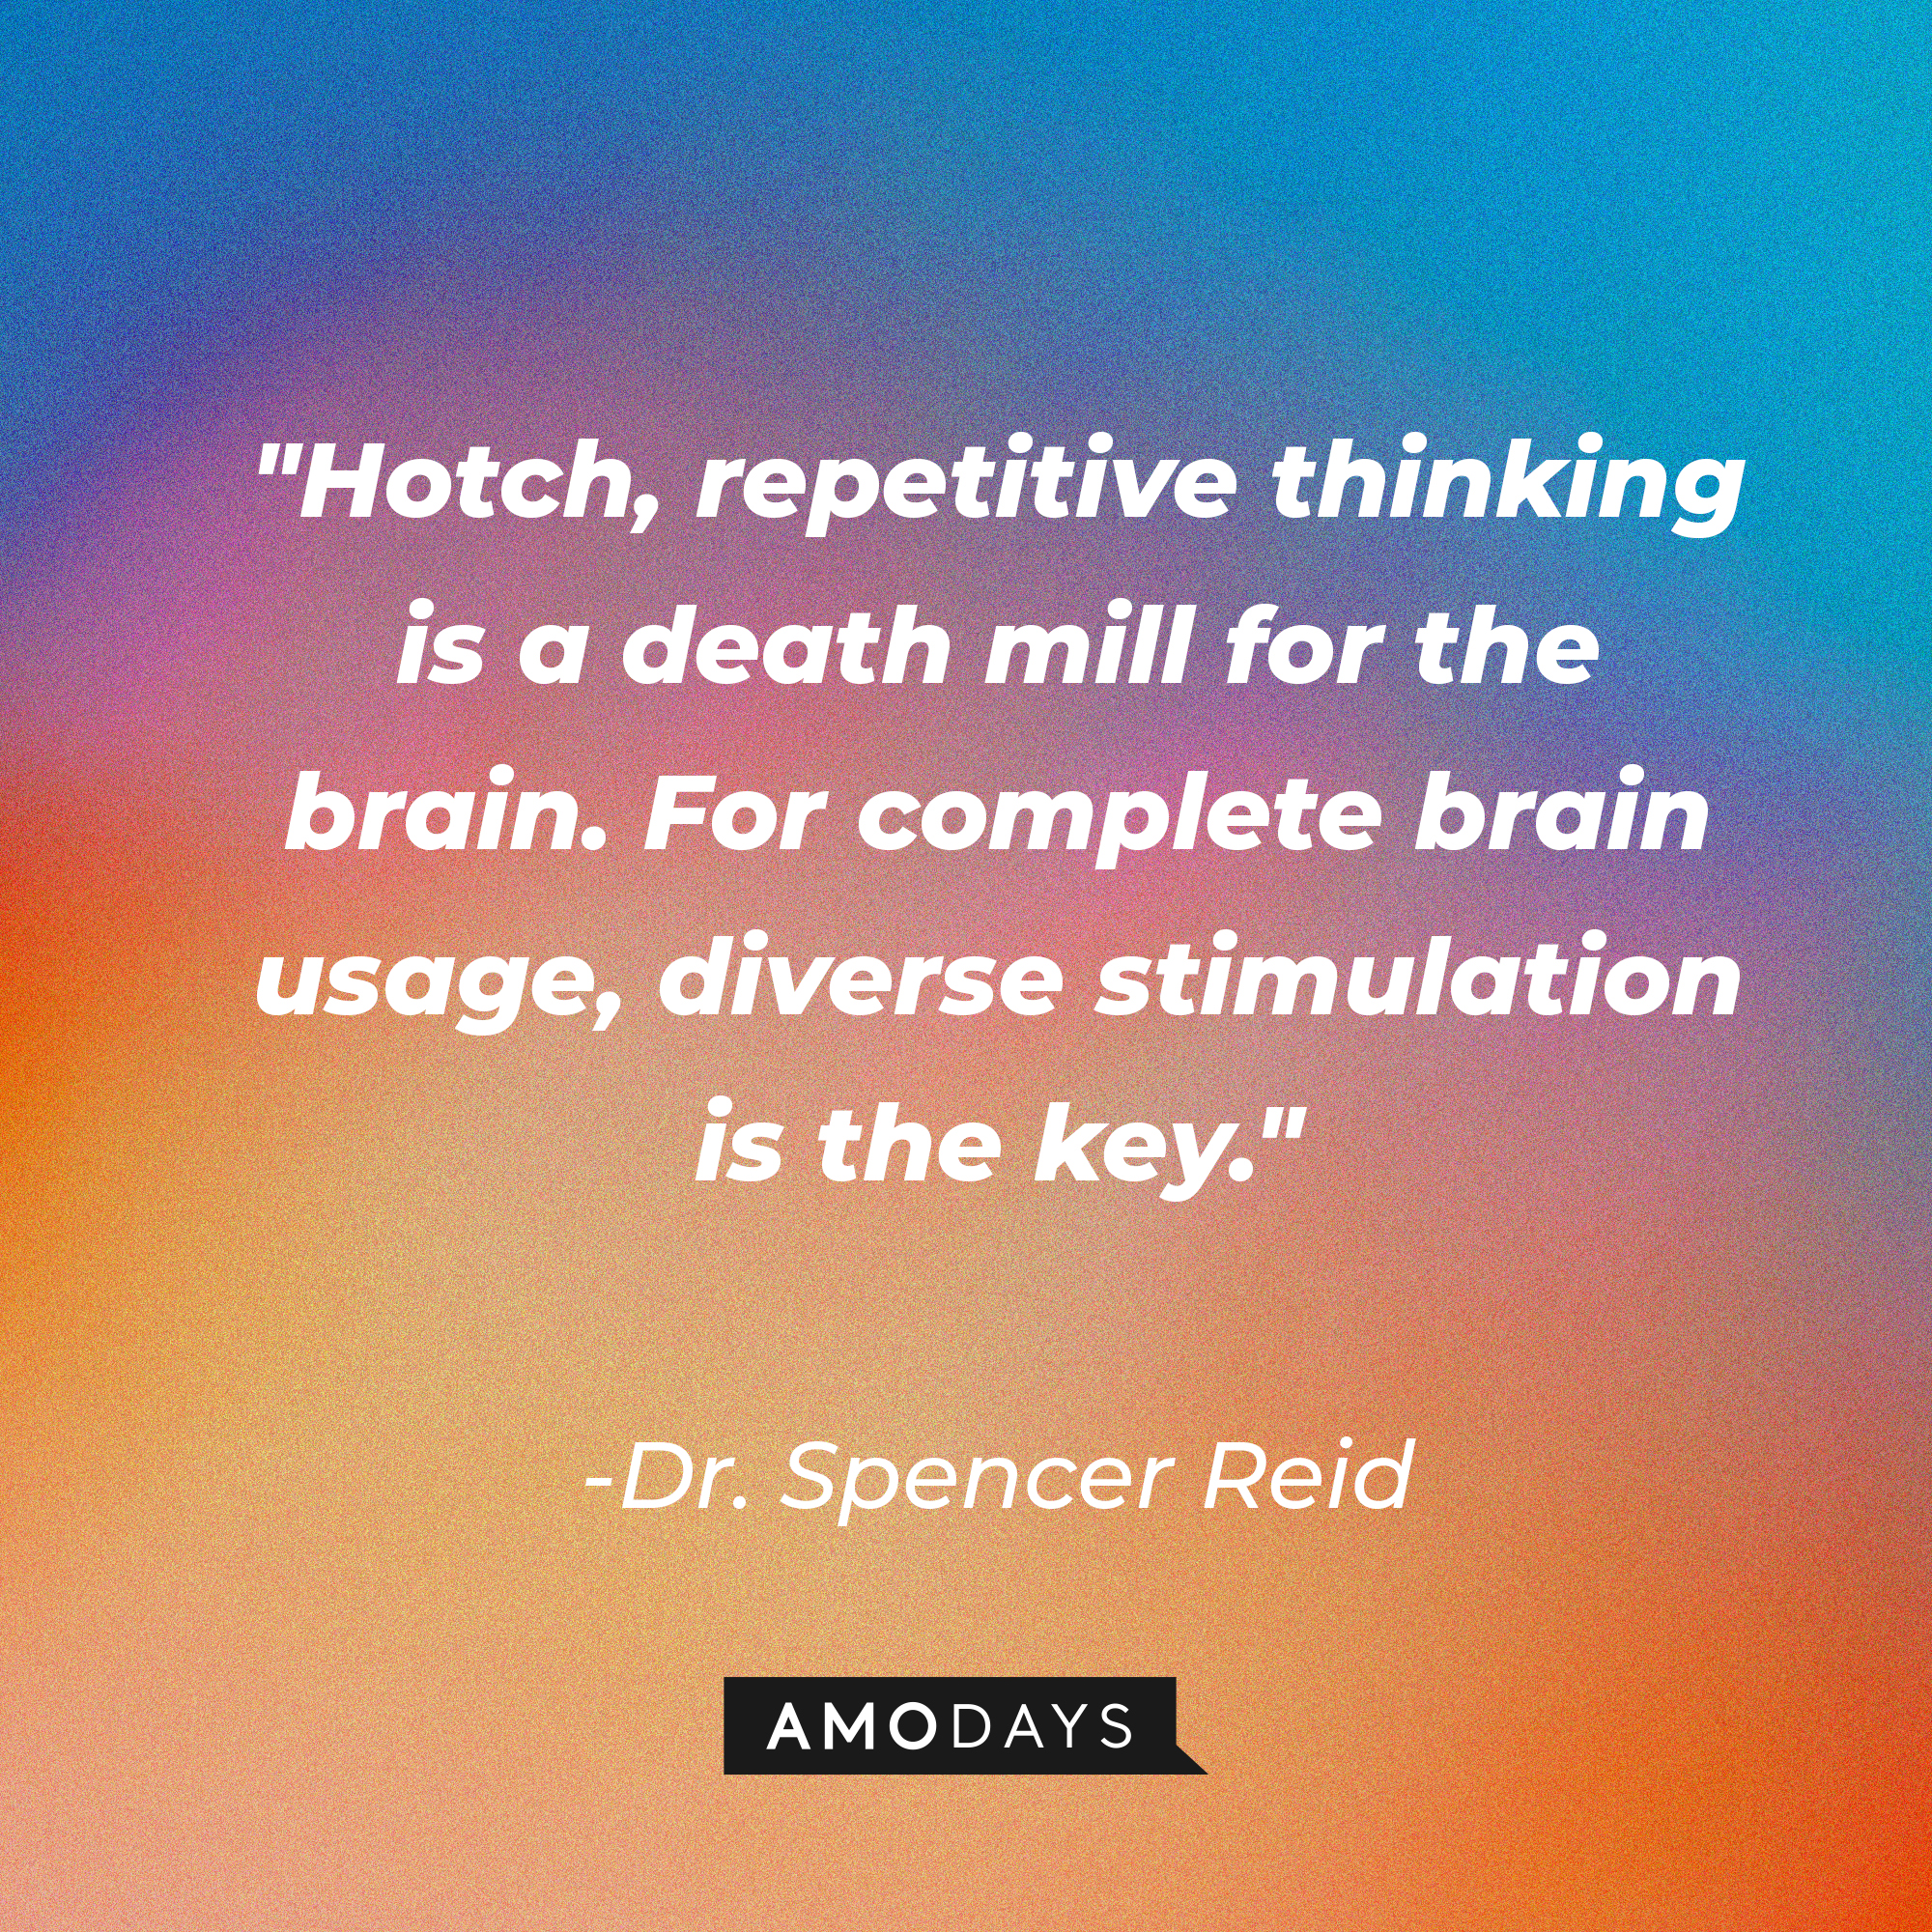 Dr. Spencer Reid's quote: "Hotch, repetitive thinking is a death mill for the brain. For complete brain usage, diverse stimulation is the key." | Source: AmoDays